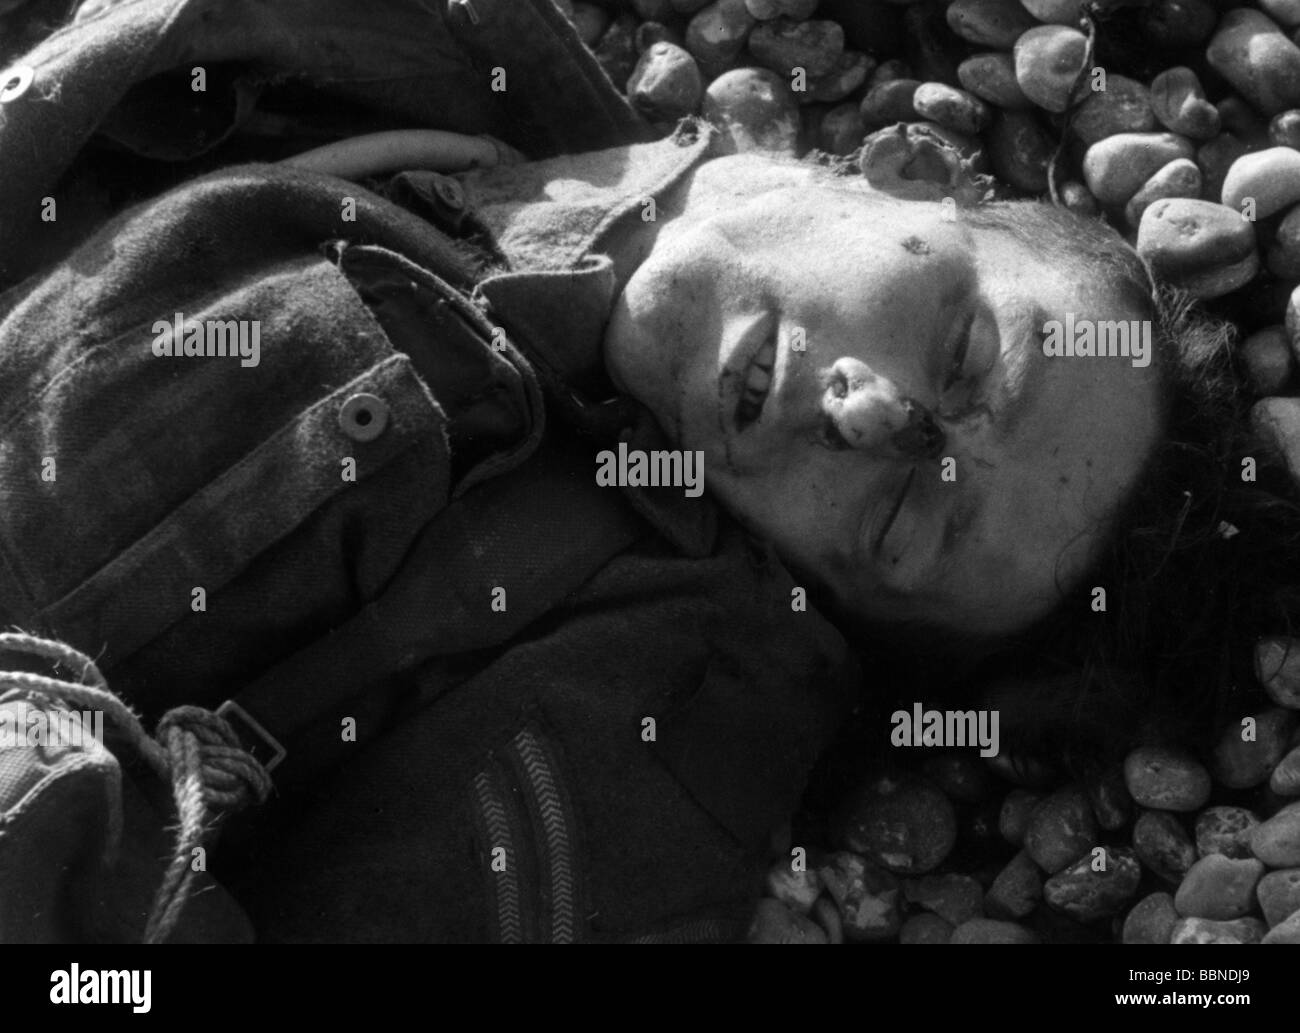 events, Second World War / WWII, France, Dieppe, 19.8.1942, fallen Canadian soldier, Stock Photo